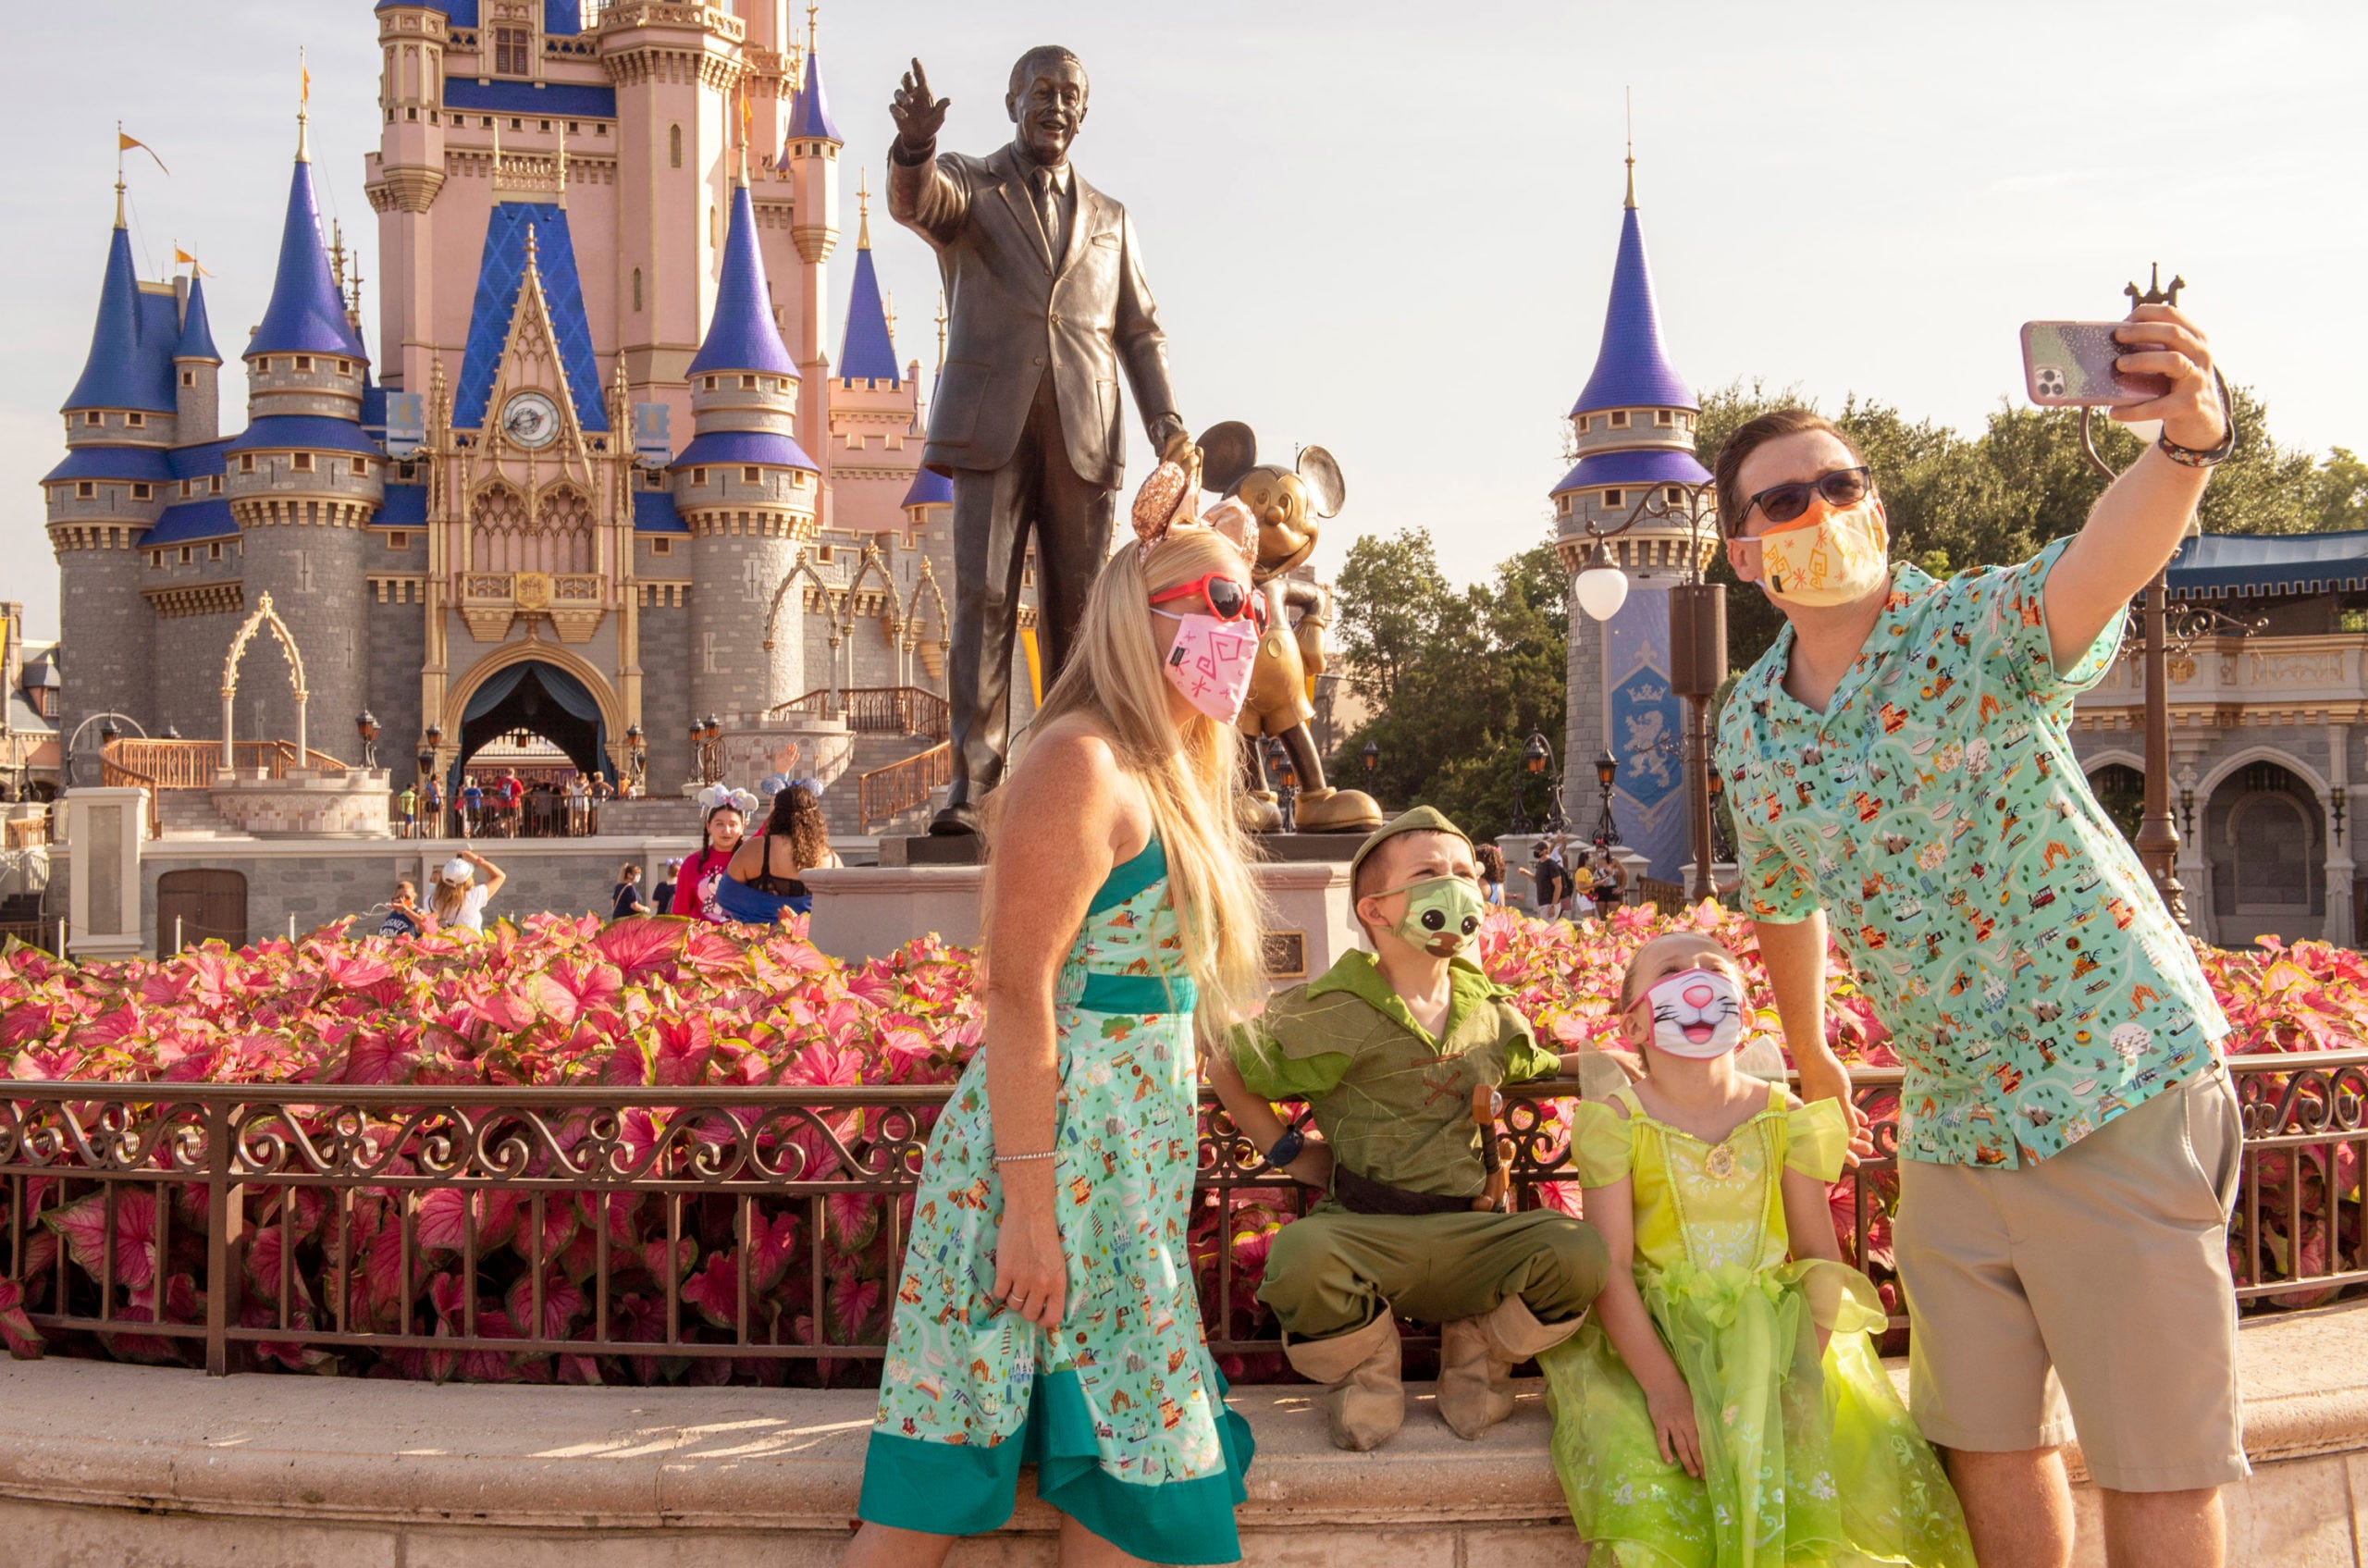 <p>Saldana said it's a $200 deposit to secure a Disney vacation package, but the remainder of the payment is not due until 30 days before you go. </p><p>"This makes it really easy to budget because you know how much your vacation's going to be, you know when you need to pay it, and you have — especially if you're booking for next December — more than 12 months to pay for it," she said.</p><p>Strategizing how much to save each week, automating your savings, or establishing a sinking fund are just some ways <a href="https://www.businessinsider.com/personal-finance/how-to-budget-for-vacation">you can budget for a big trip</a>, travel experts previously told Insider's Alene Laney.</p>